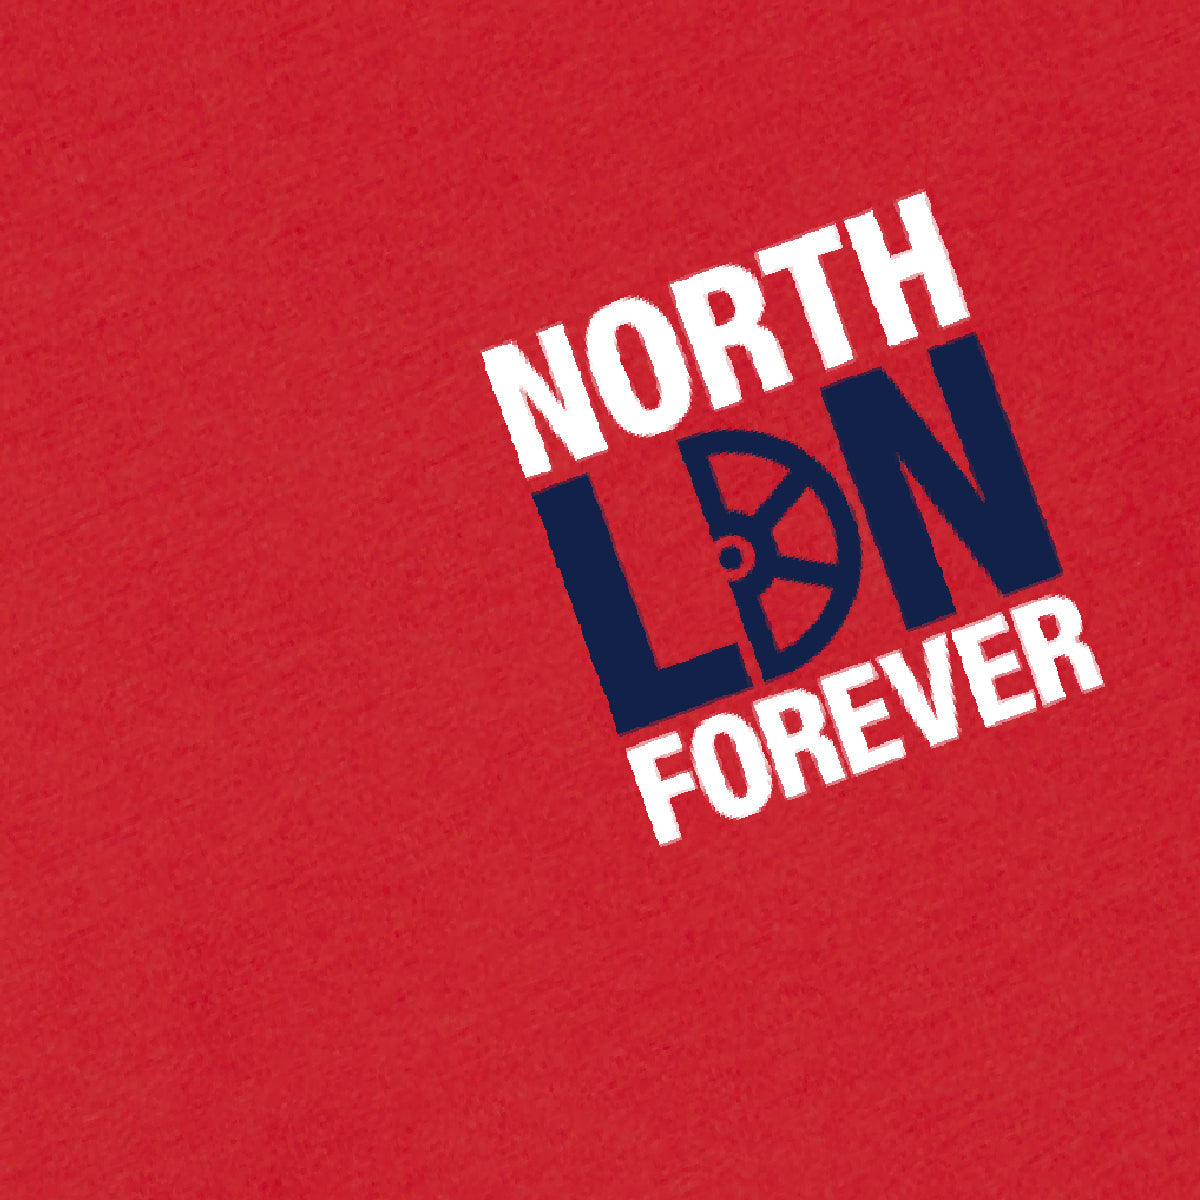 North LDN Forever Tee